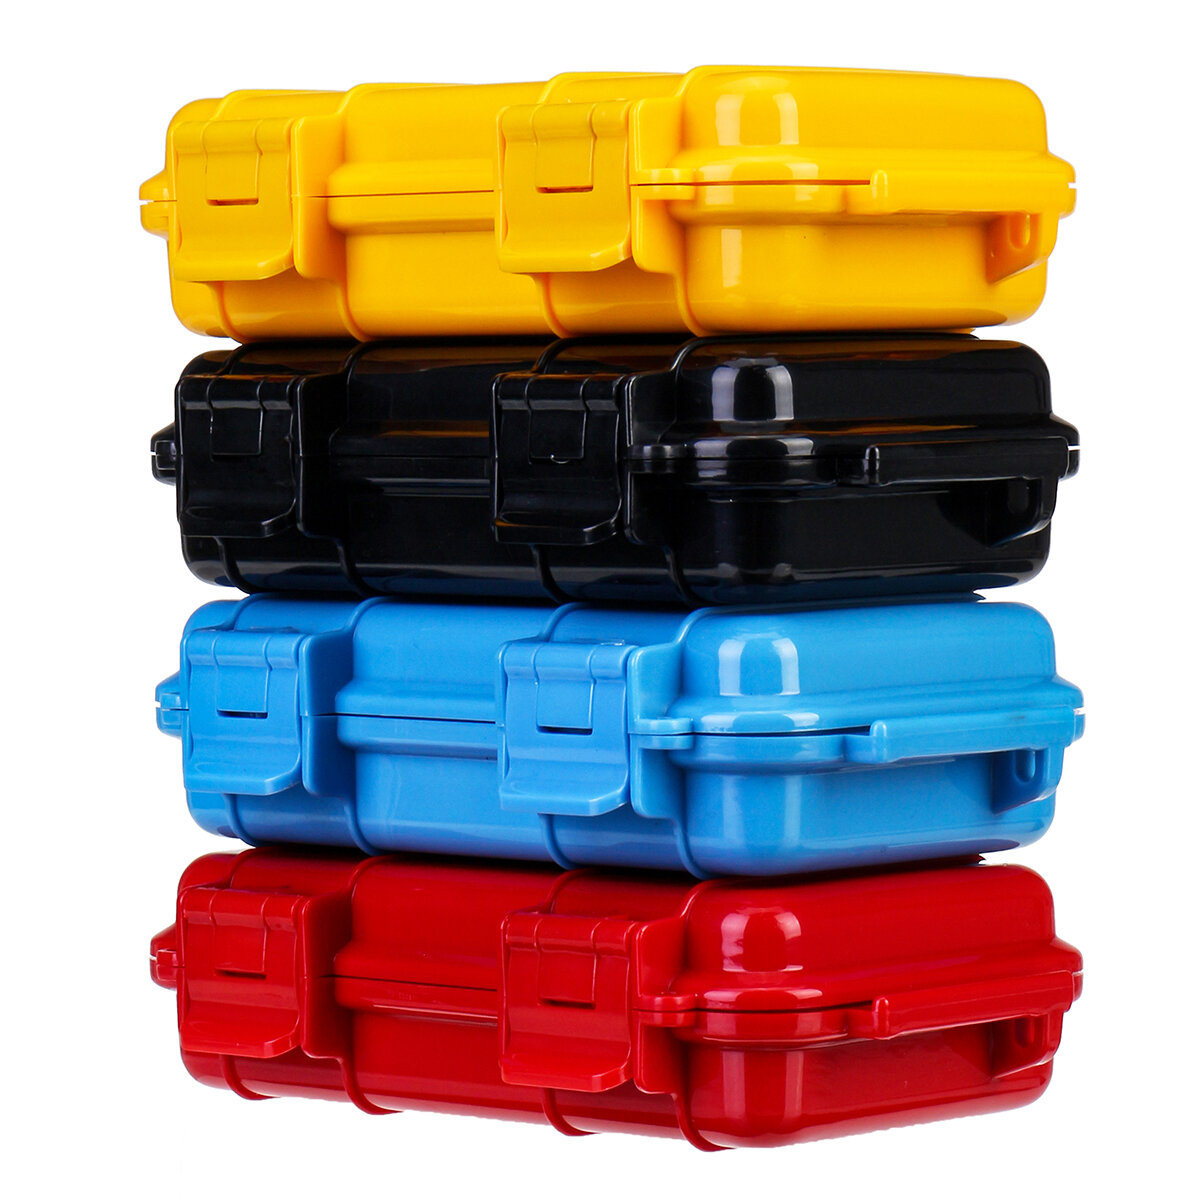 Waterproof Airtight Survival Storage Case Container Fishing Carry Tool Box with Sponge